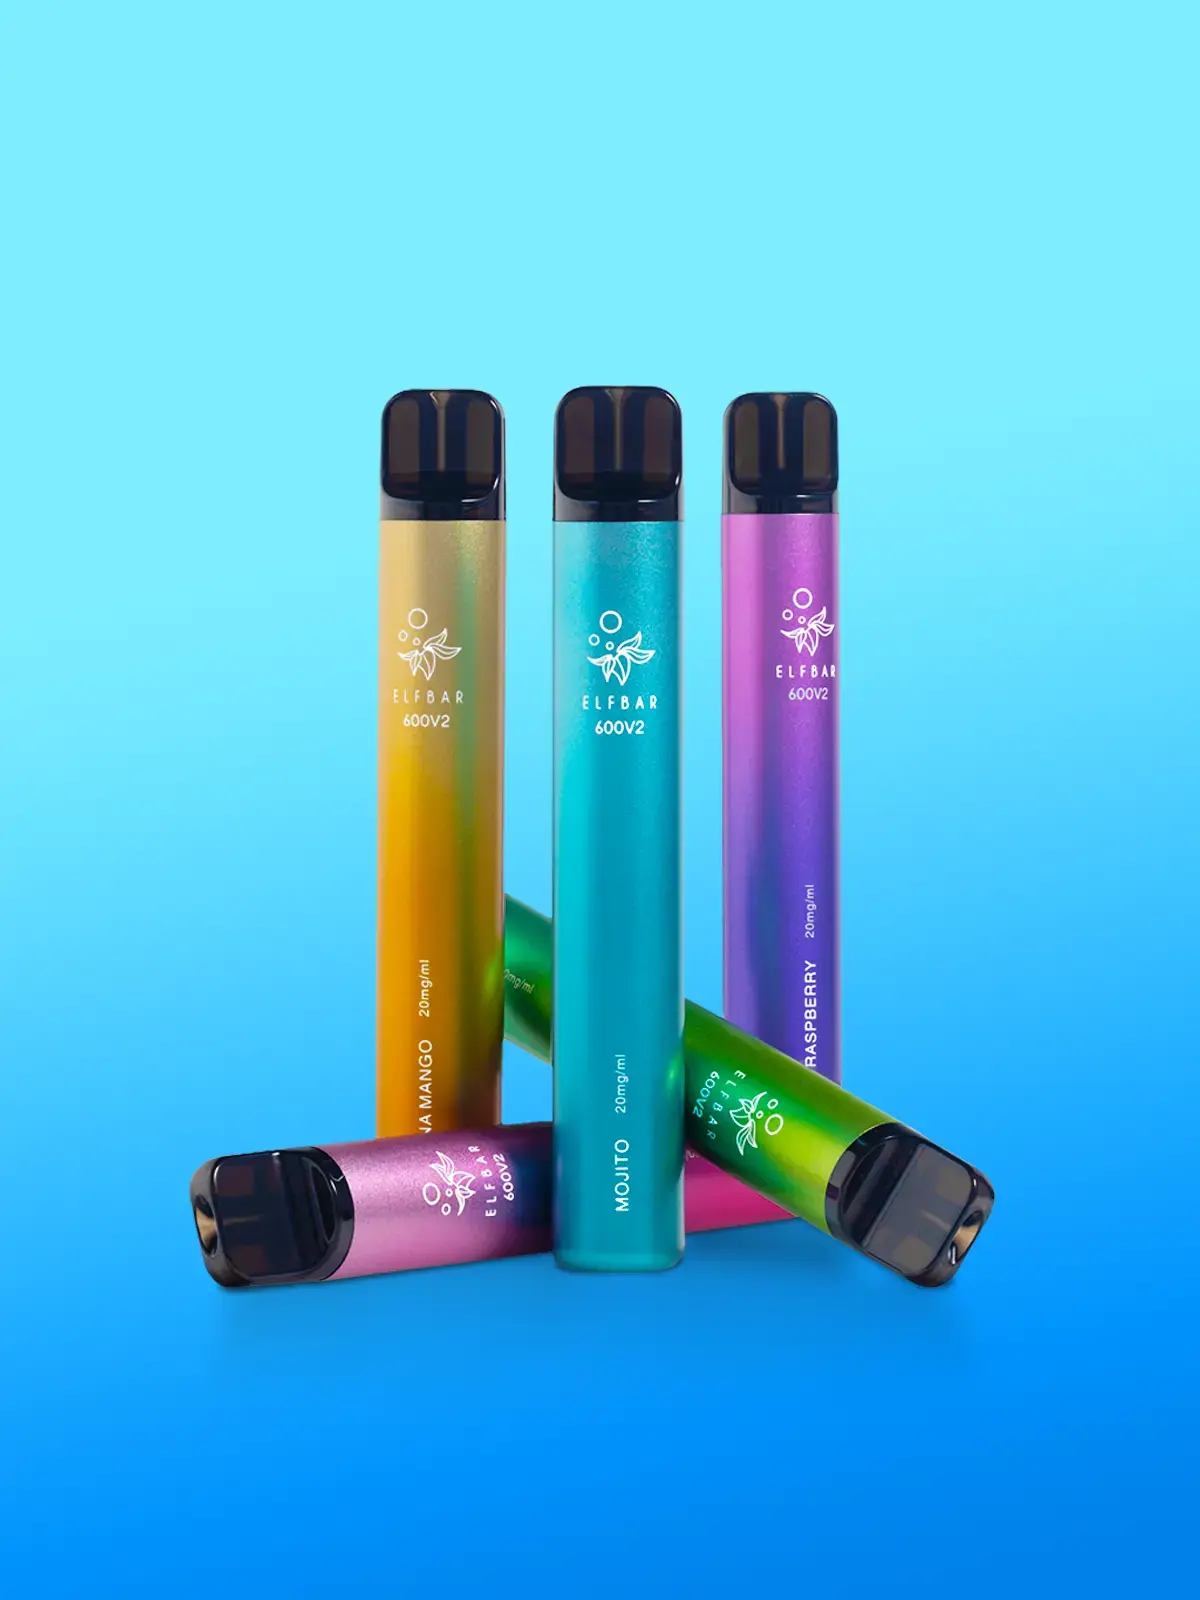 A selection of Elf Bar 600V2 disposable vapes in front of a light blue background